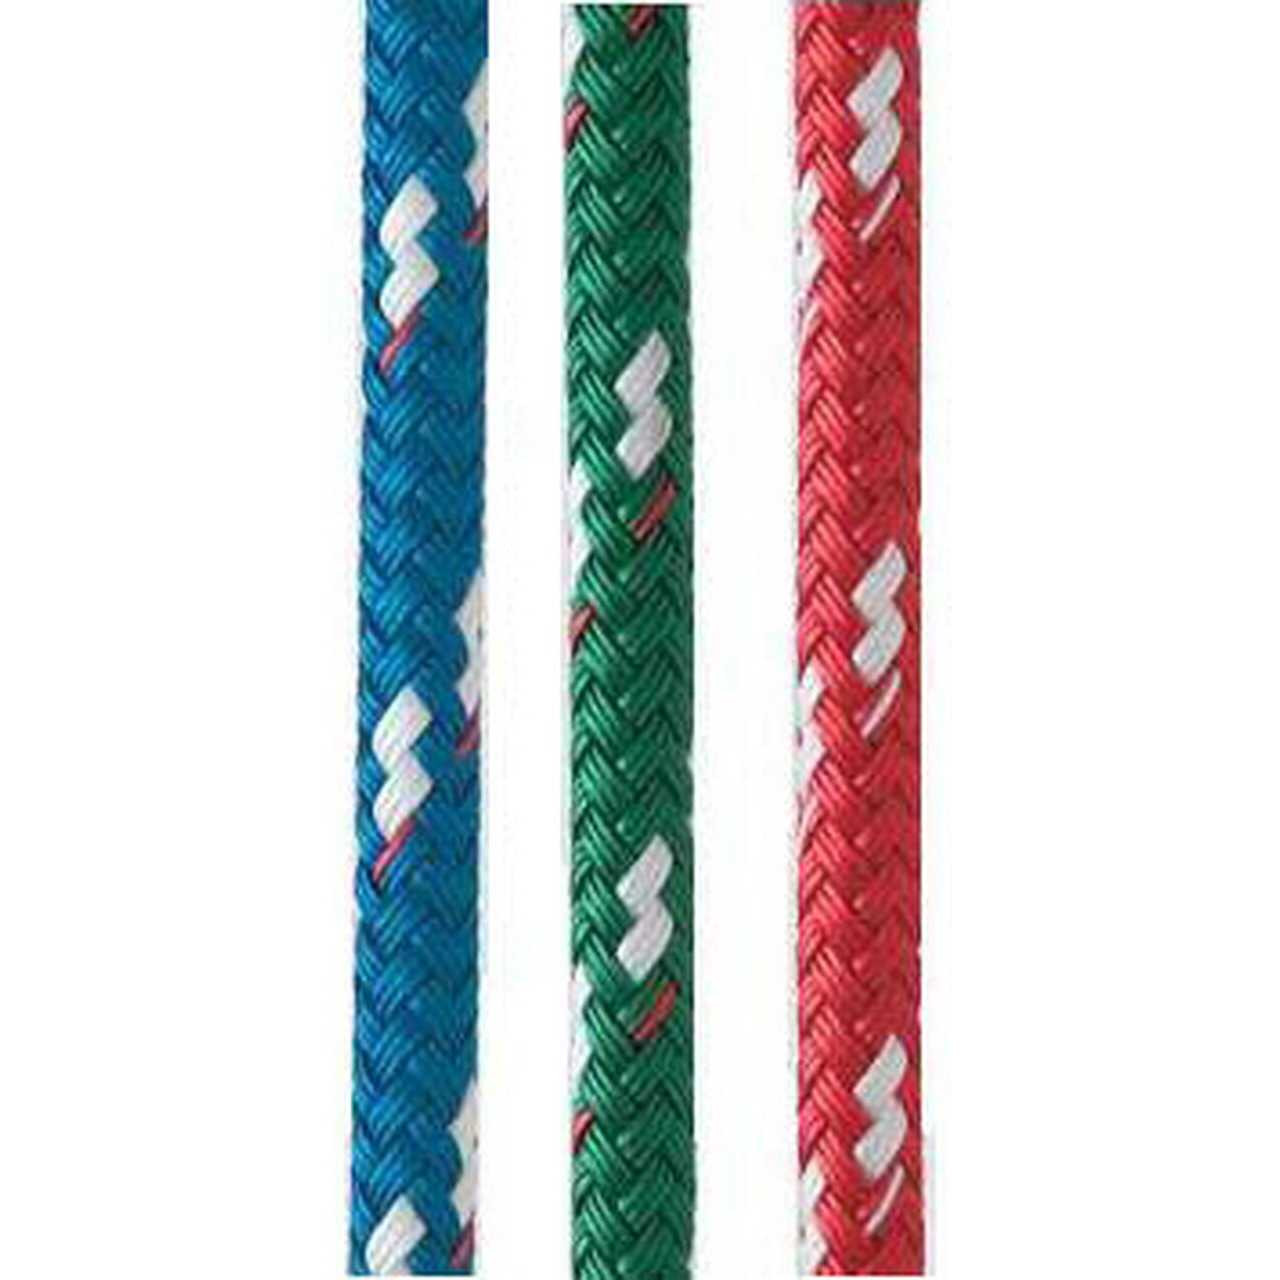 https://cdn11.bigcommerce.com/s-scyvnex8so/images/stencil/1280x1280/products/10297/17314/New-England-Ropes-Sta-Set-Blue-Green-Red__38449.1618943420.jpg?c=2